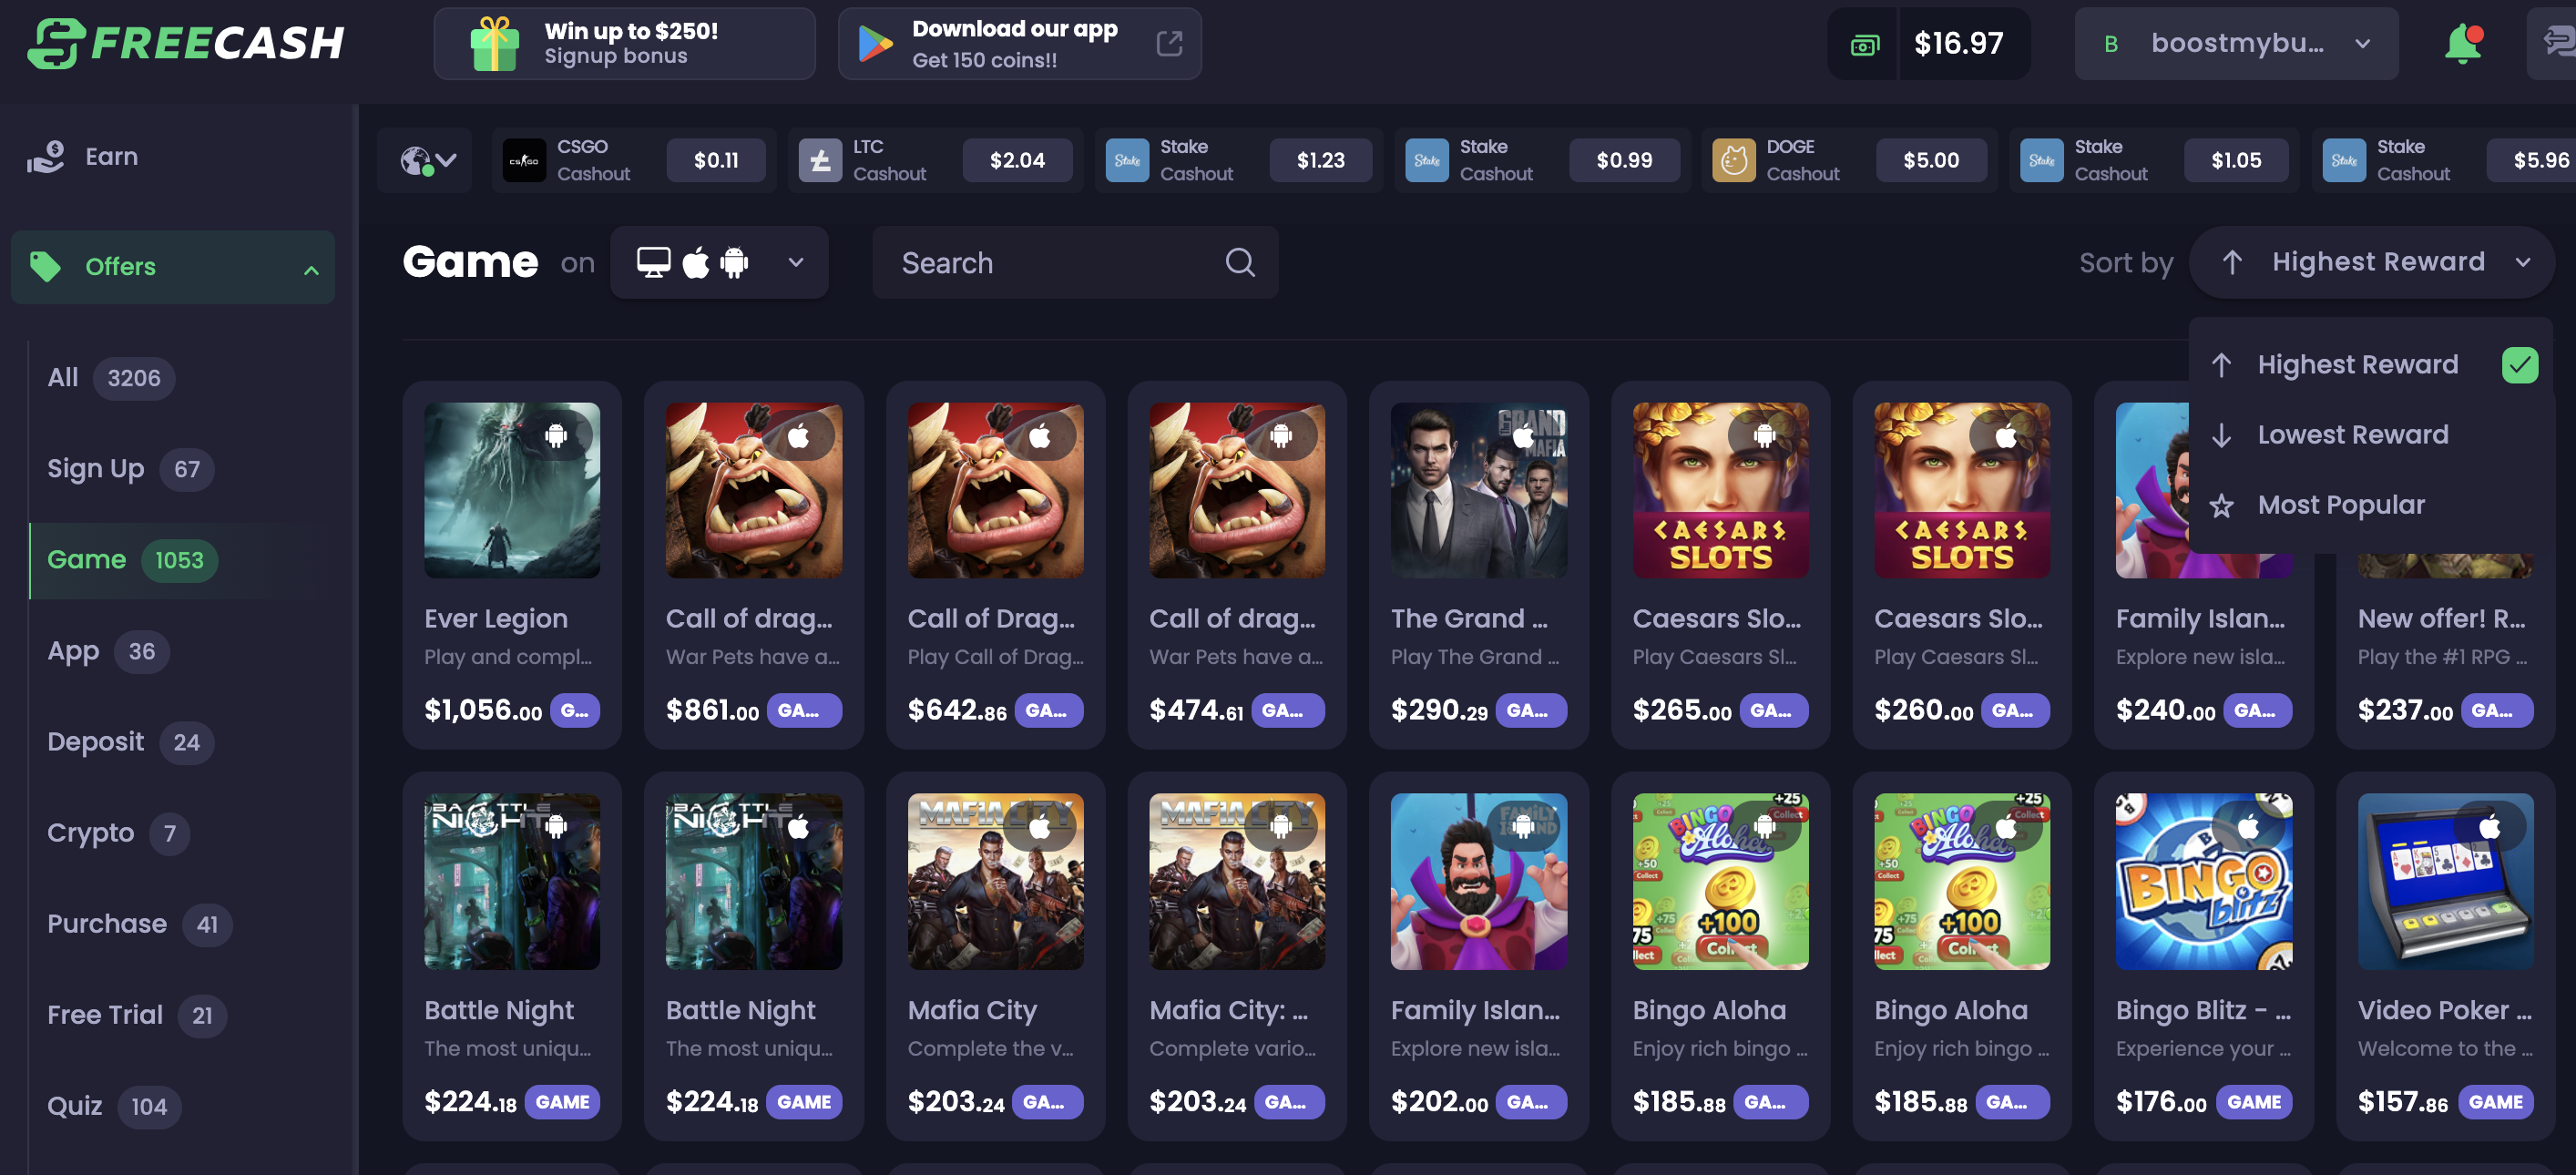 screenshot of freecash website showing some games you can get paid to play